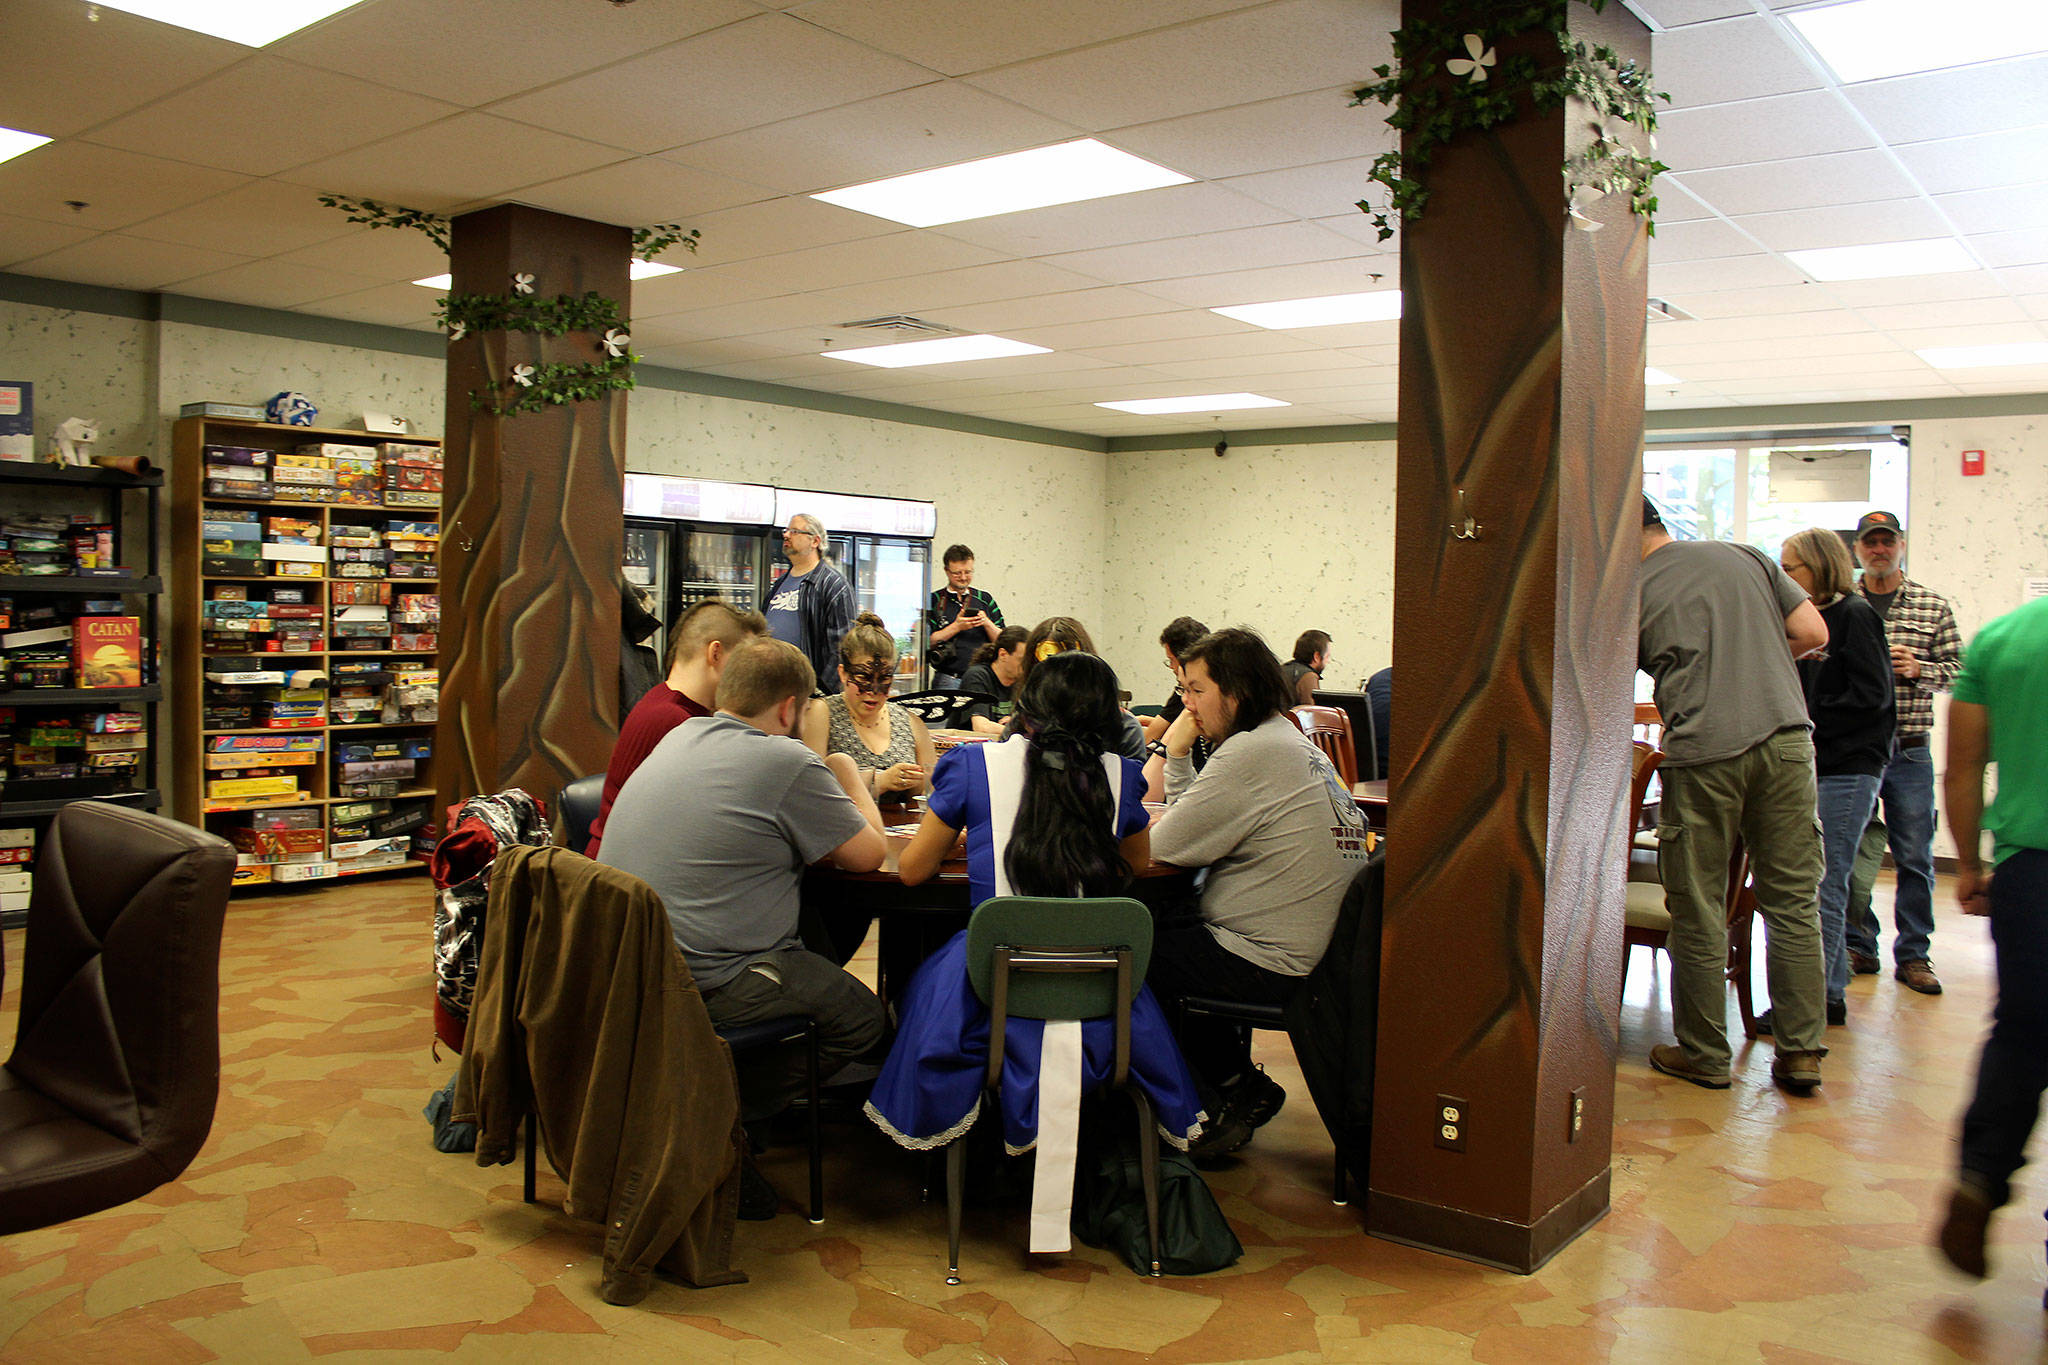 Step into a celebration of beer, board games and nerd culture at Ashley’s Pub: Boardom’s End